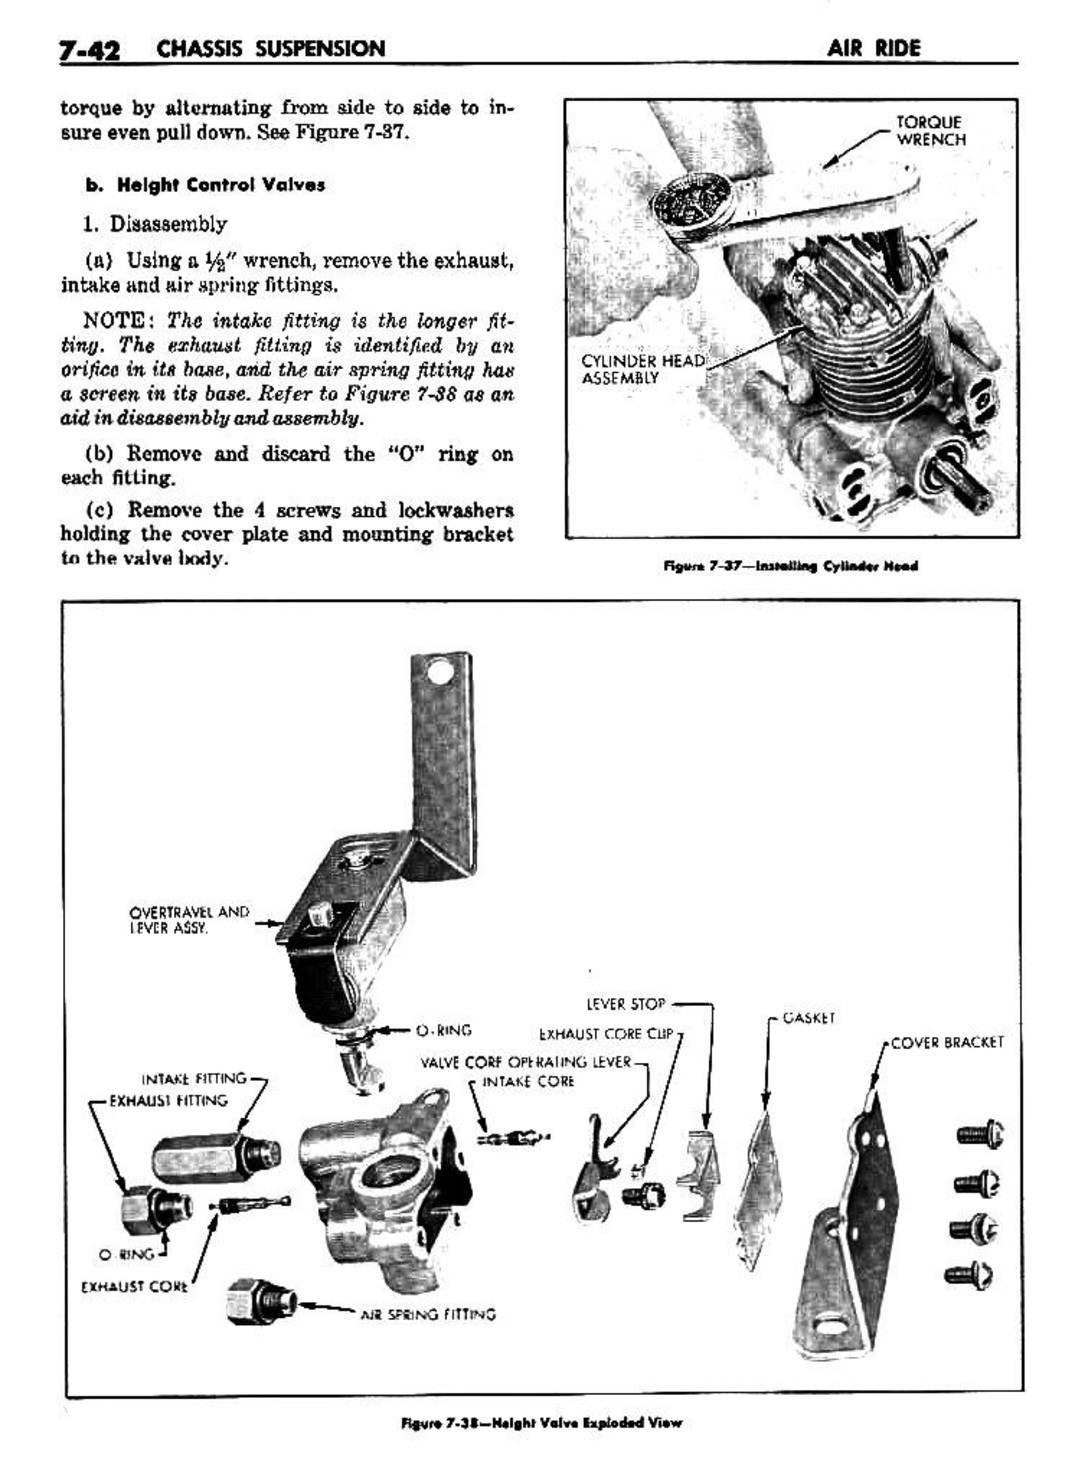 n_08 1959 Buick Shop Manual - Chassis Suspension-042-042.jpg